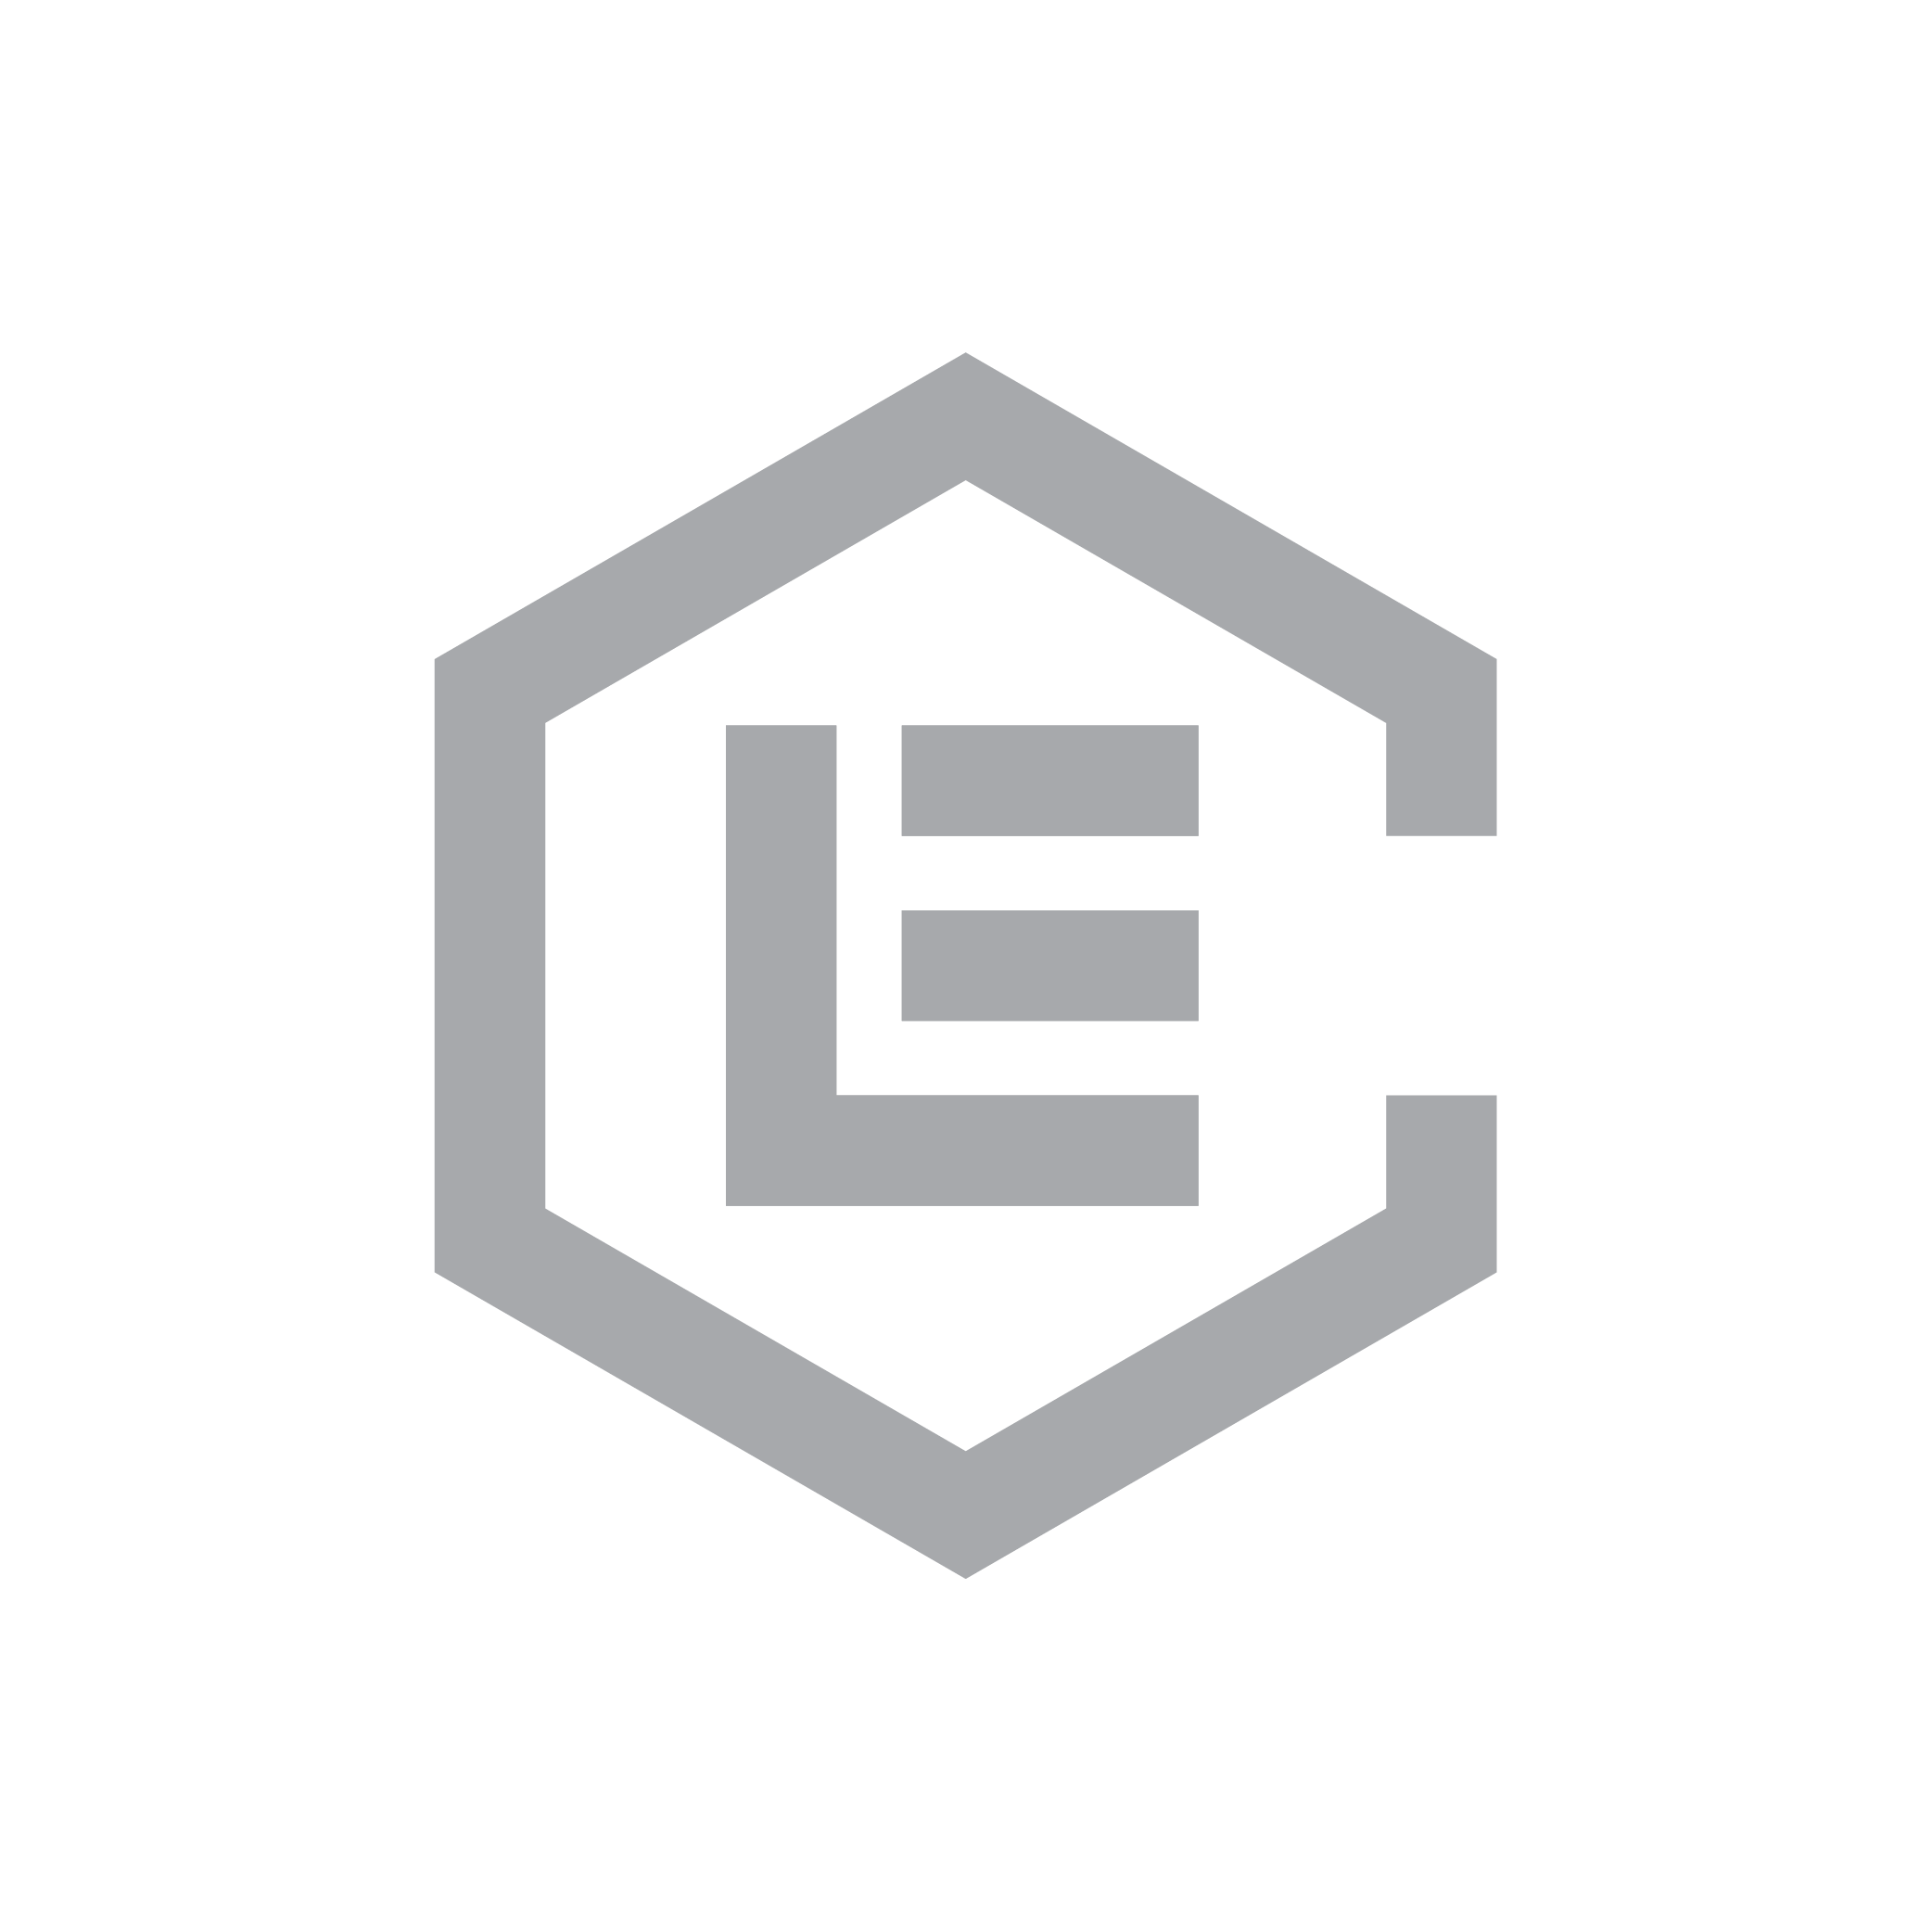 Crypto Lists Ltd - Gray and transparent PNG logo Image